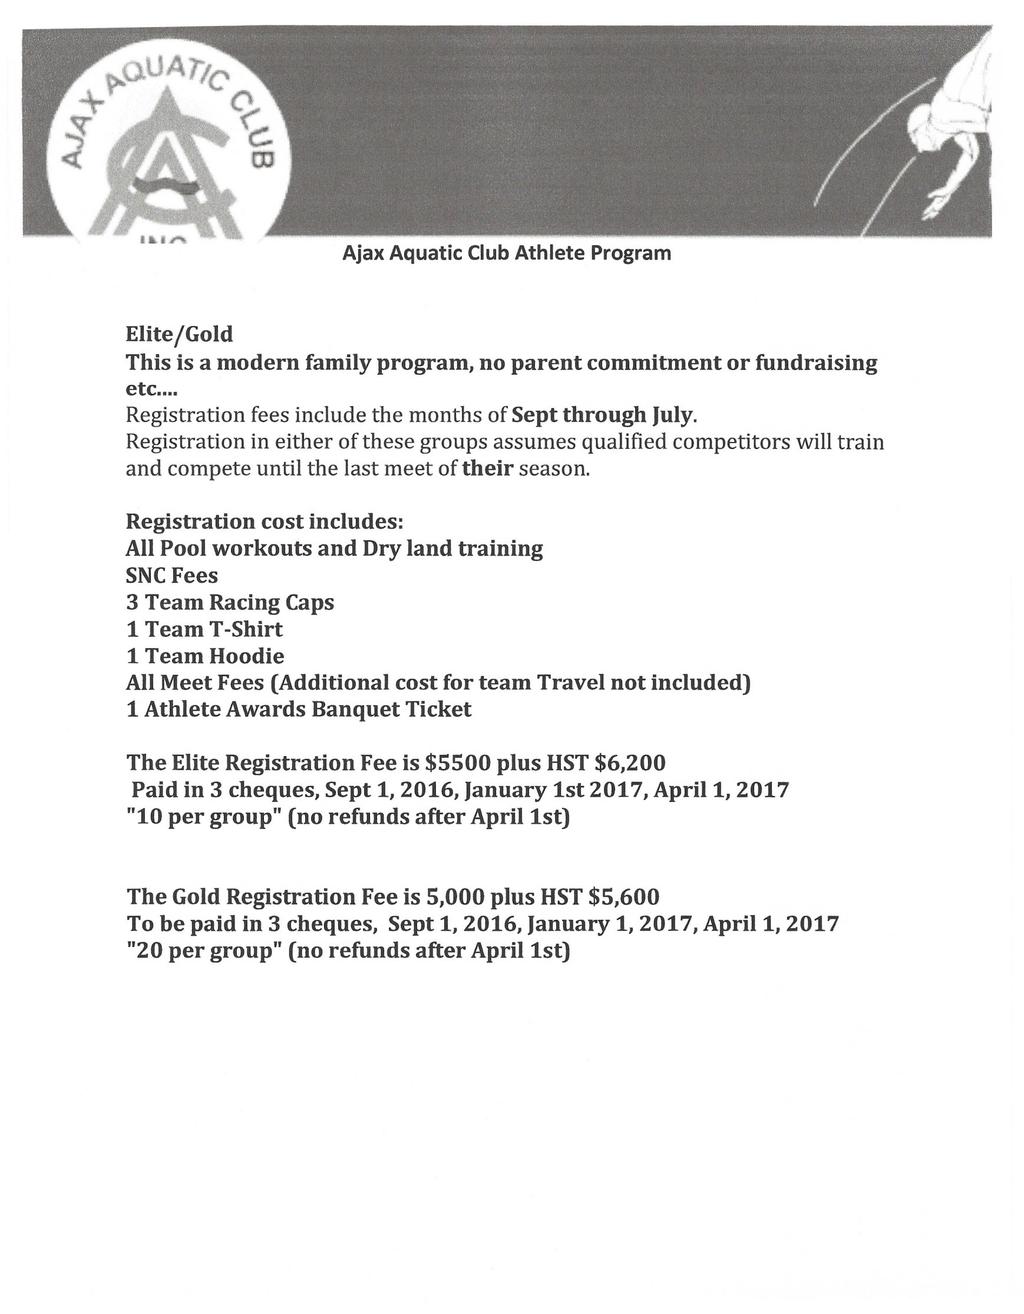 Ajax Aquatic Club Athlete Program Elite/Gold This is a modern family program, no parent commitment or fundraising etc... Registration fees include the months of Sept through July.